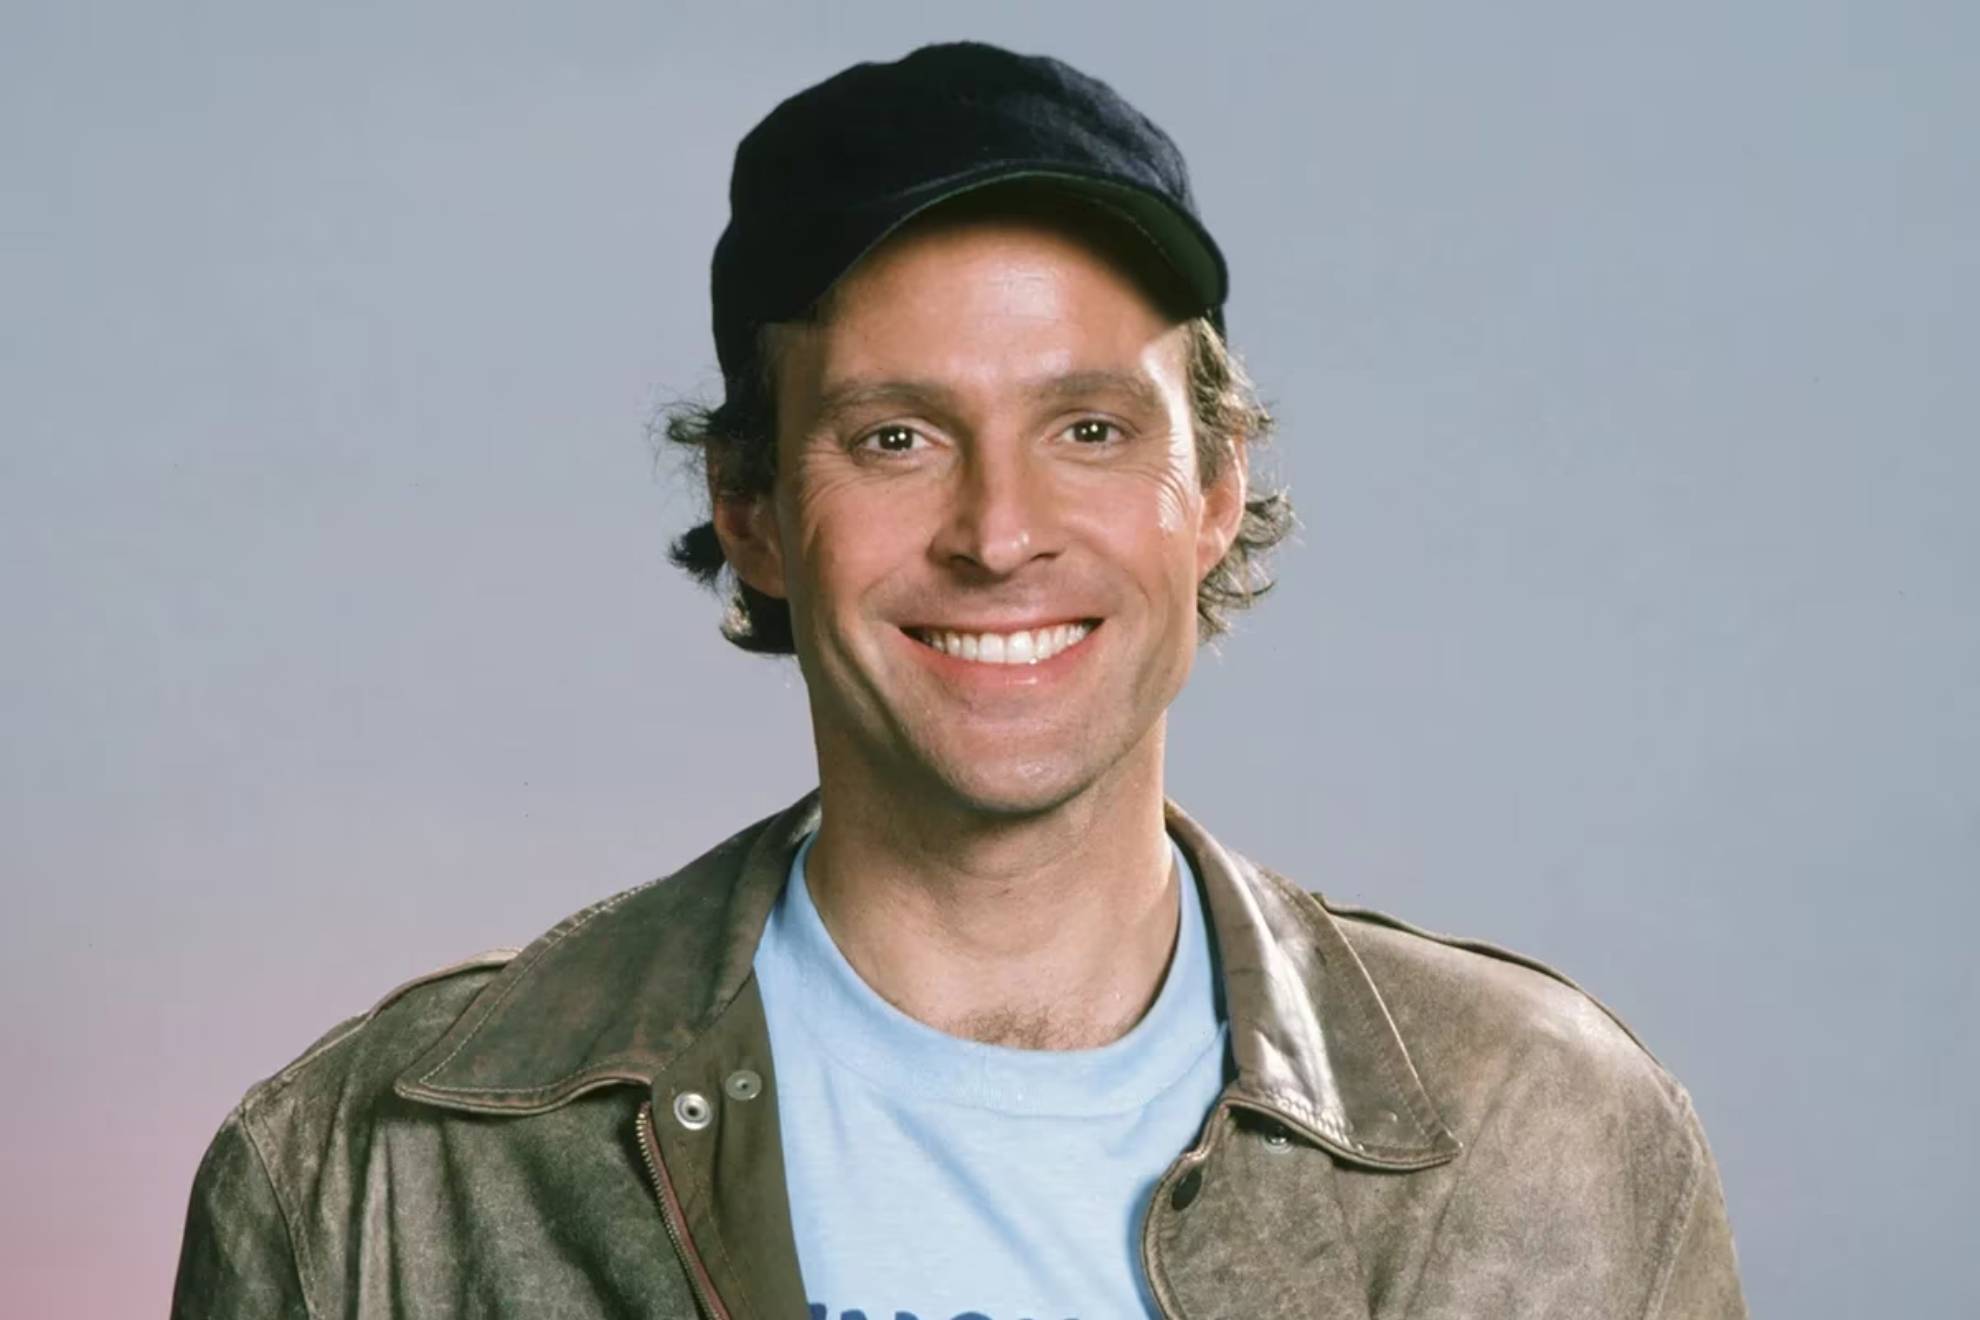 20 Astonishing Facts About Dwight Schultz - Facts.net